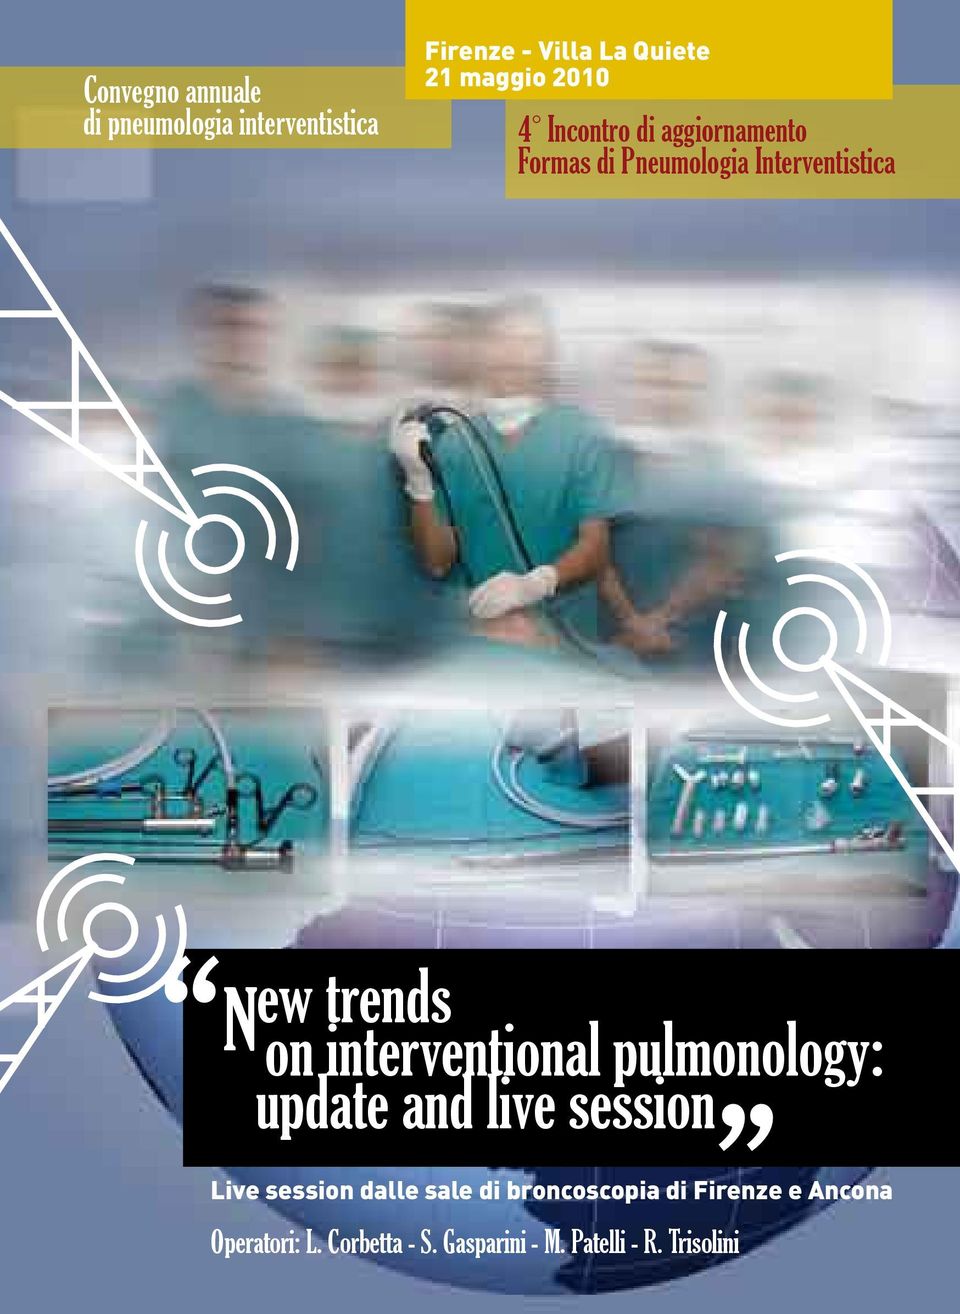 interventional pulmonology: update and live session Live session dalle sale di